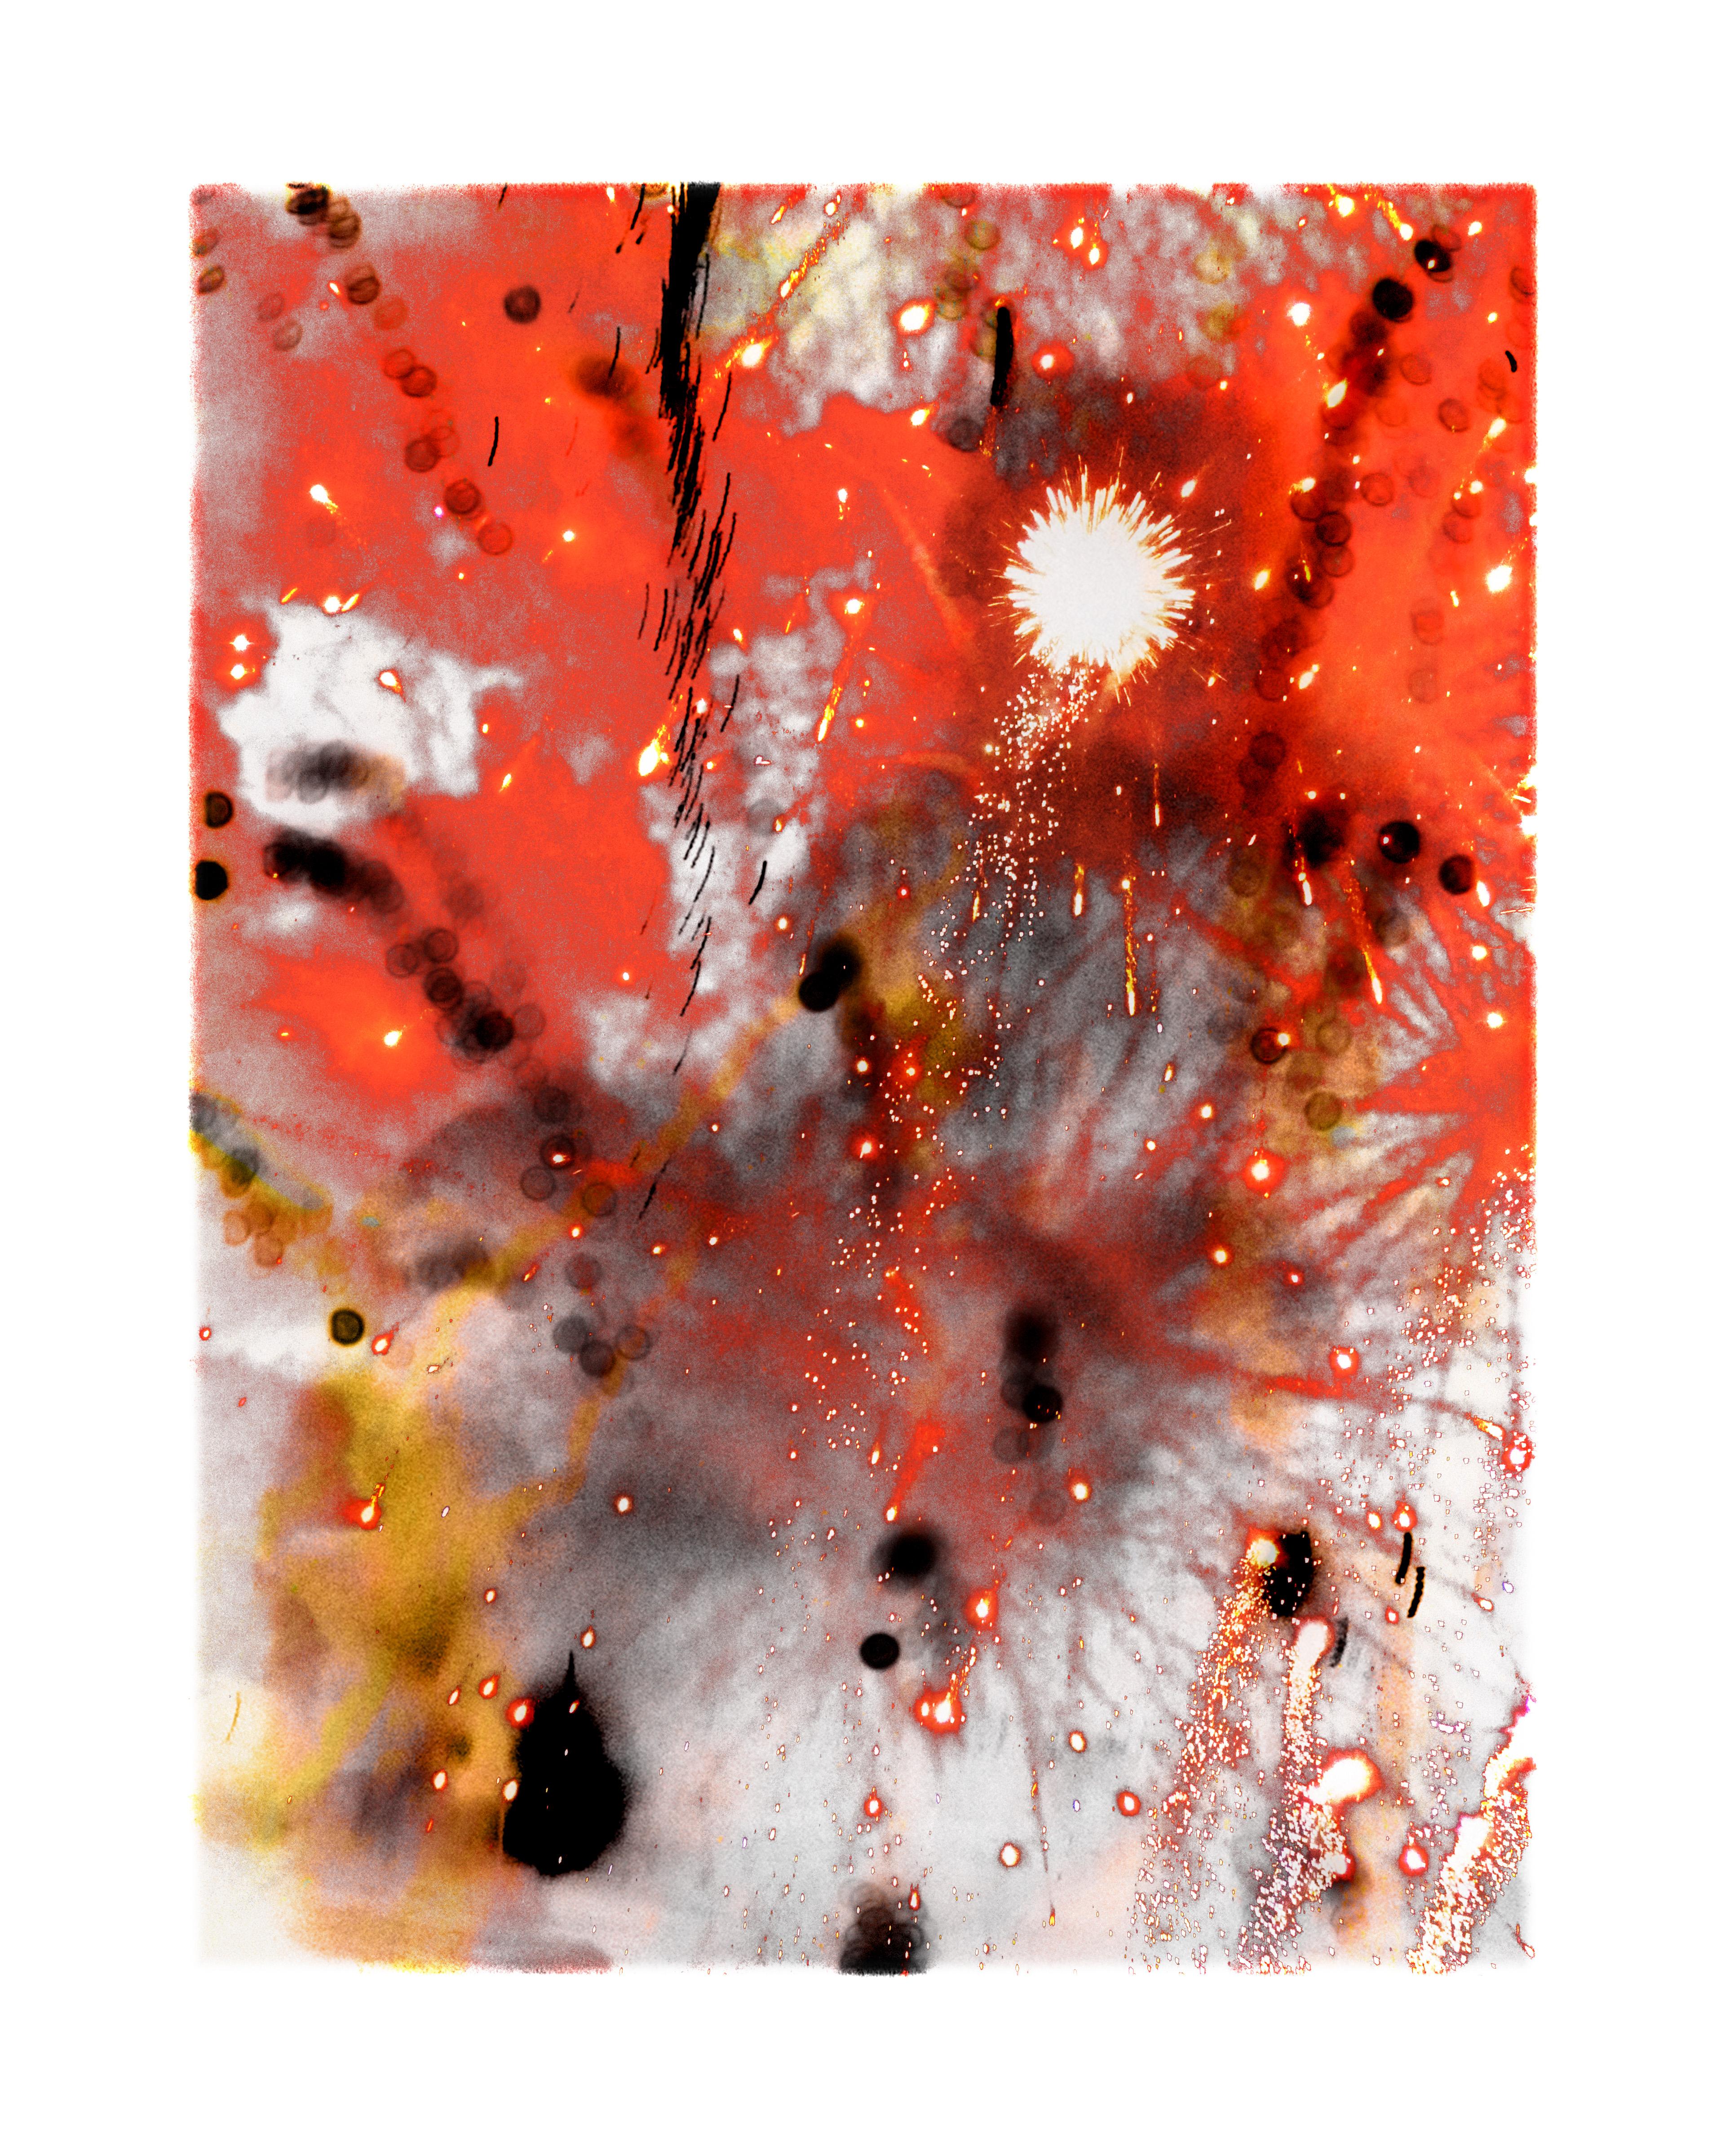 "Explosure, #03" by Tom & Lois White is available as a hand-signed and numbered archival pigment print on heavyweight cold press cotton rag paper in the following editions: 
40x52in; edition of 3
26x36in; edition of 12

*Custom framing options